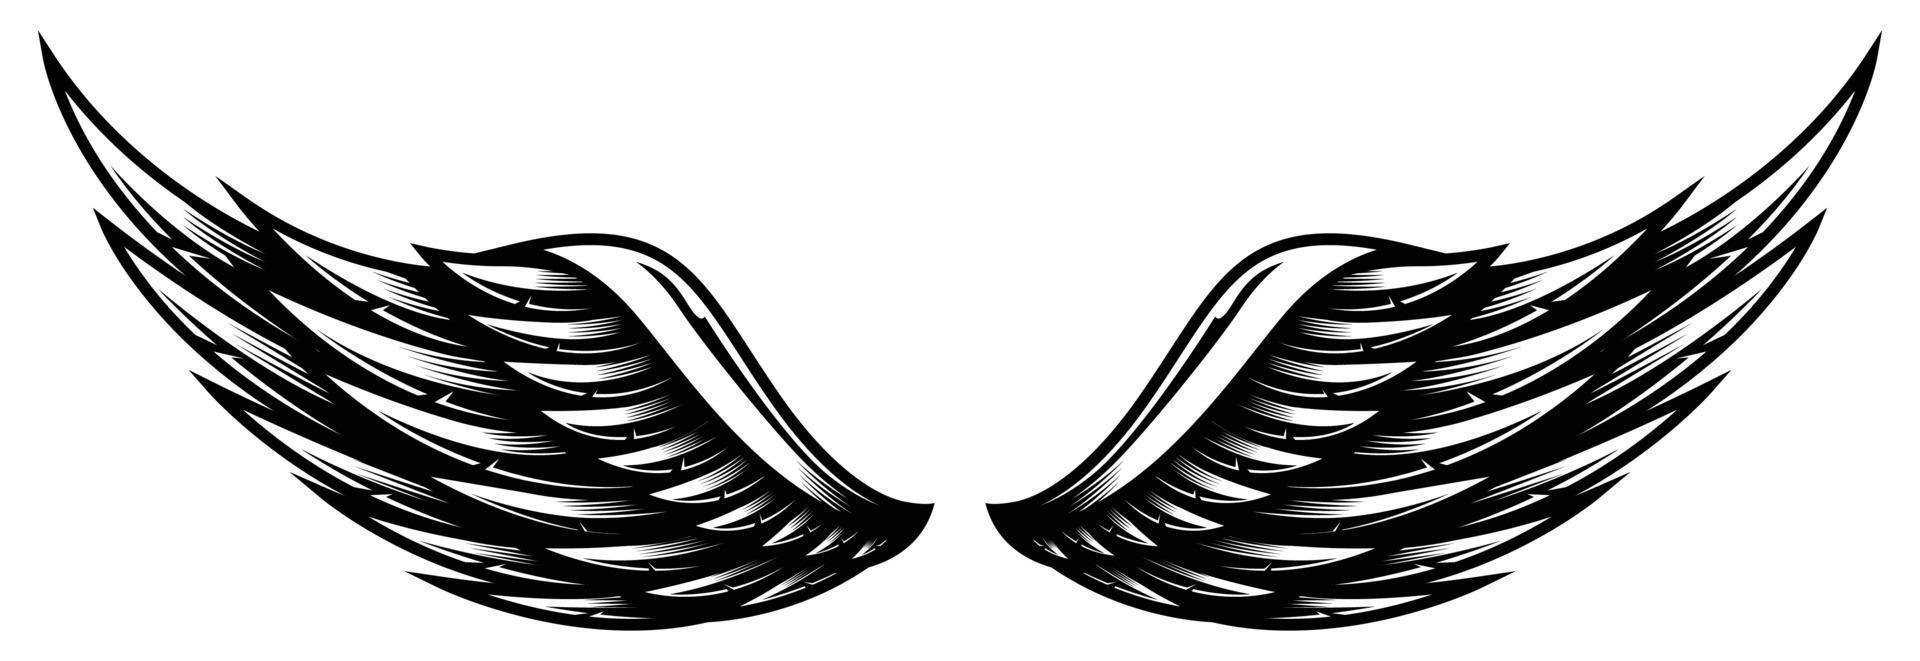 Couple of Wings Black and White Vector